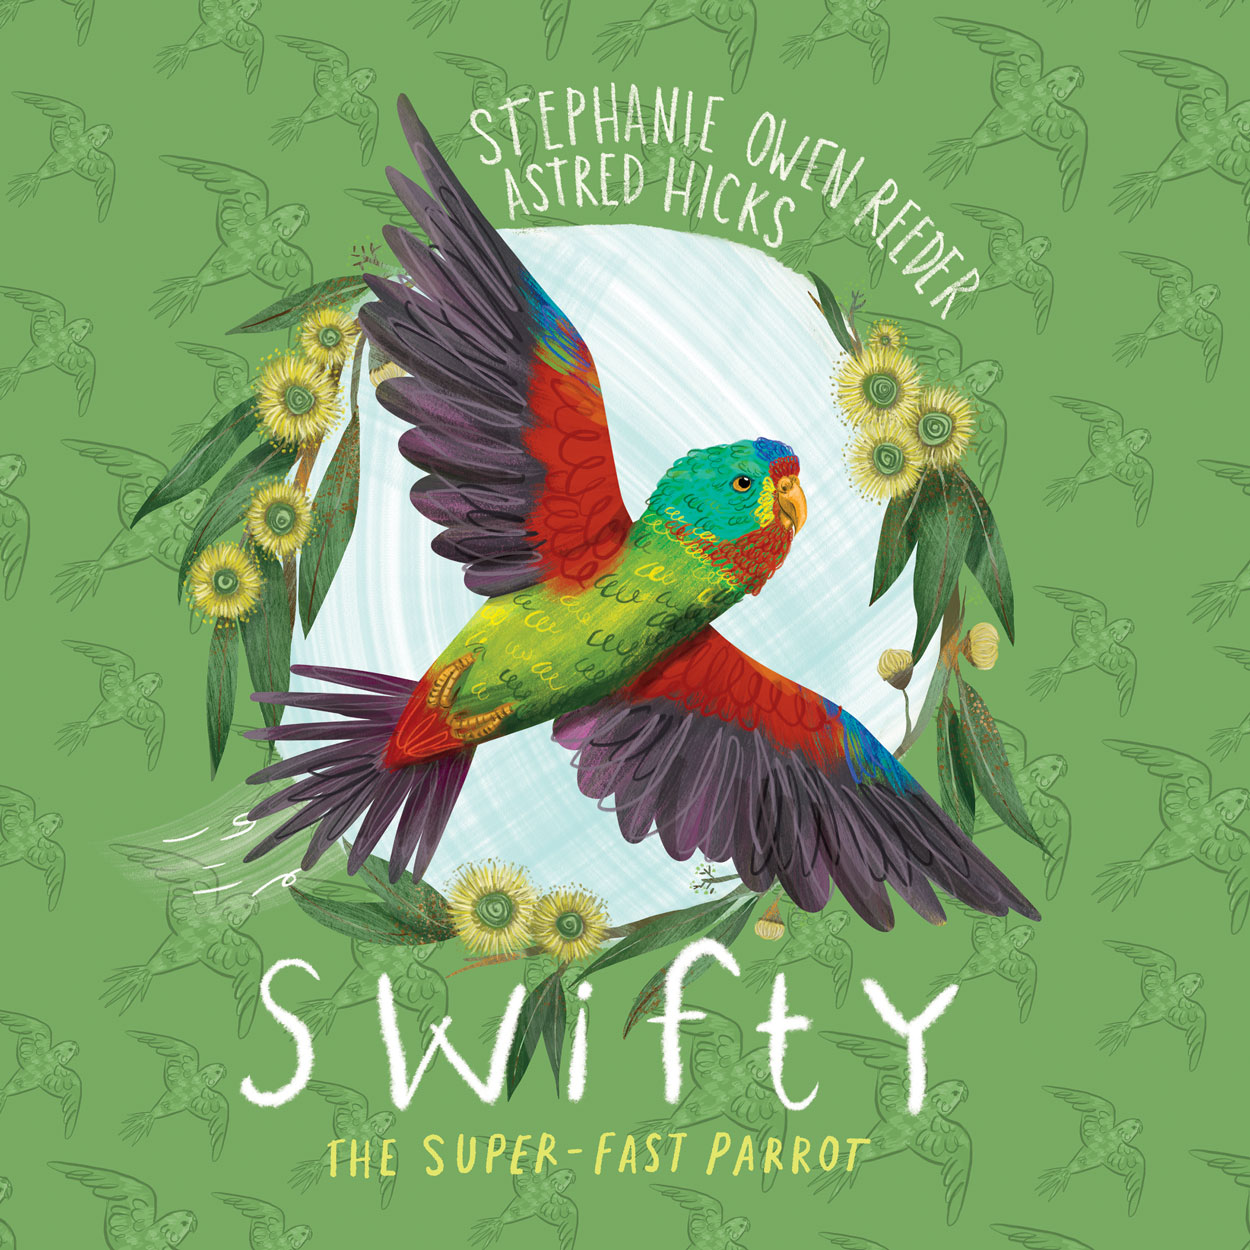 Cover of 'Swifty', featuring an illustration of a swift parrot flying, encircled by gum flowers and leaves.